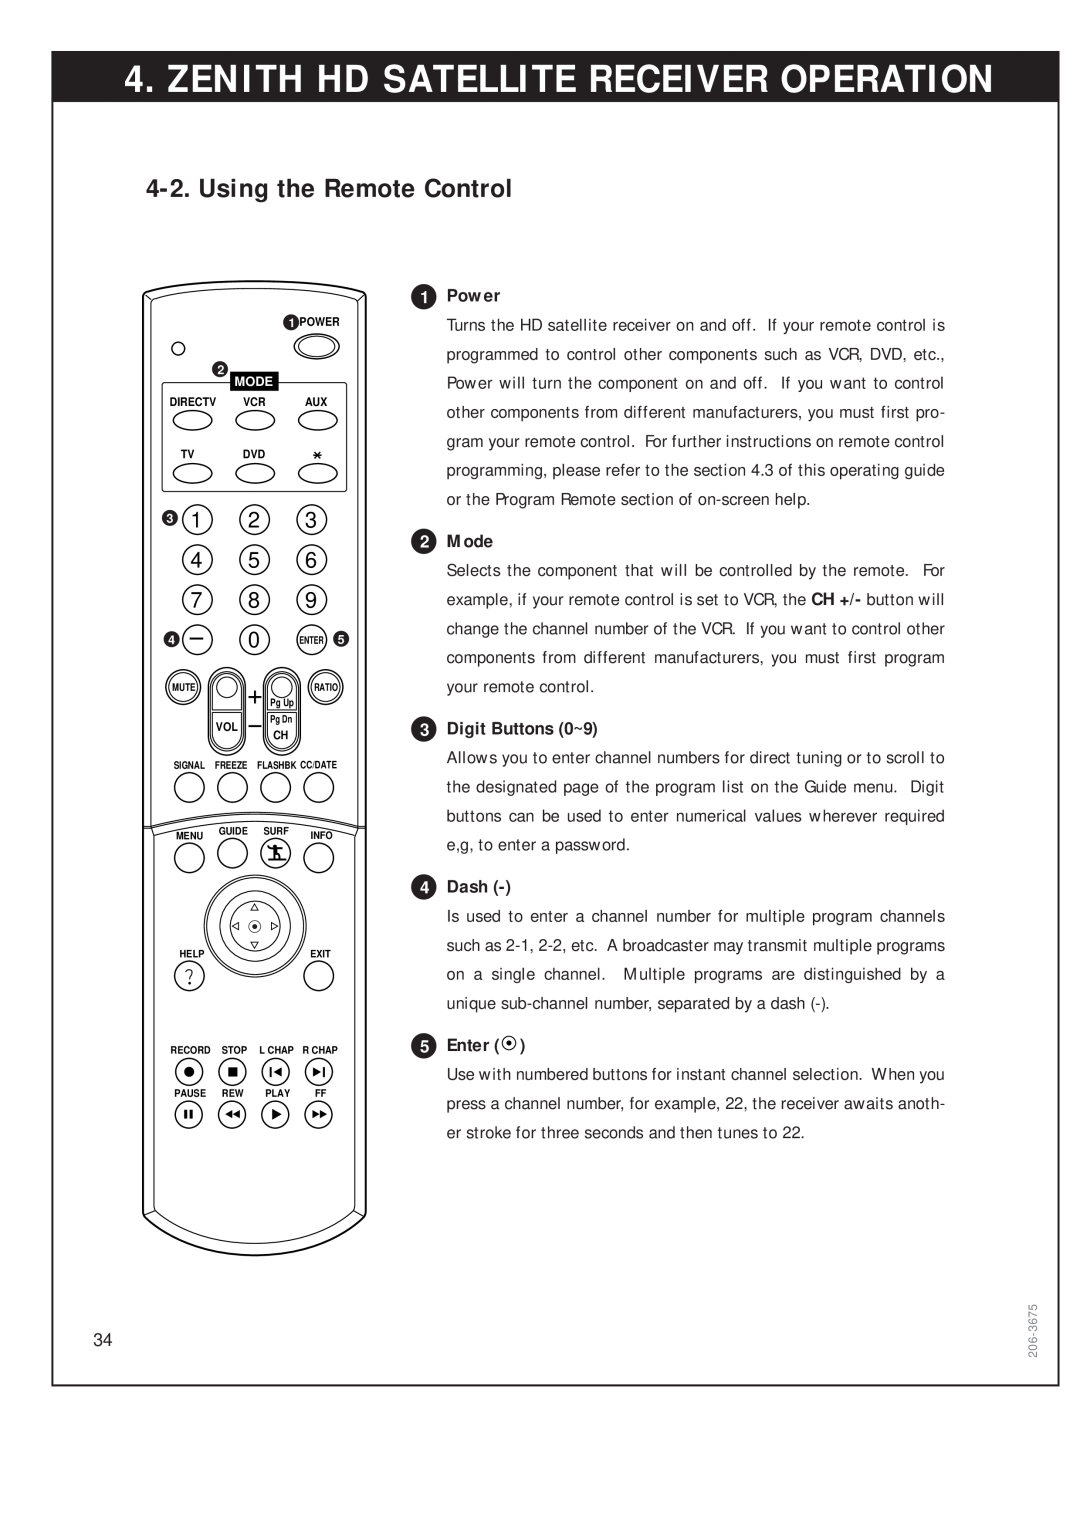 Zenith DTV1080 warranty Using the Remote Control, 3 1 2 4 5 7 8, Zenith Hd Satellite Receiver Operation, Power 